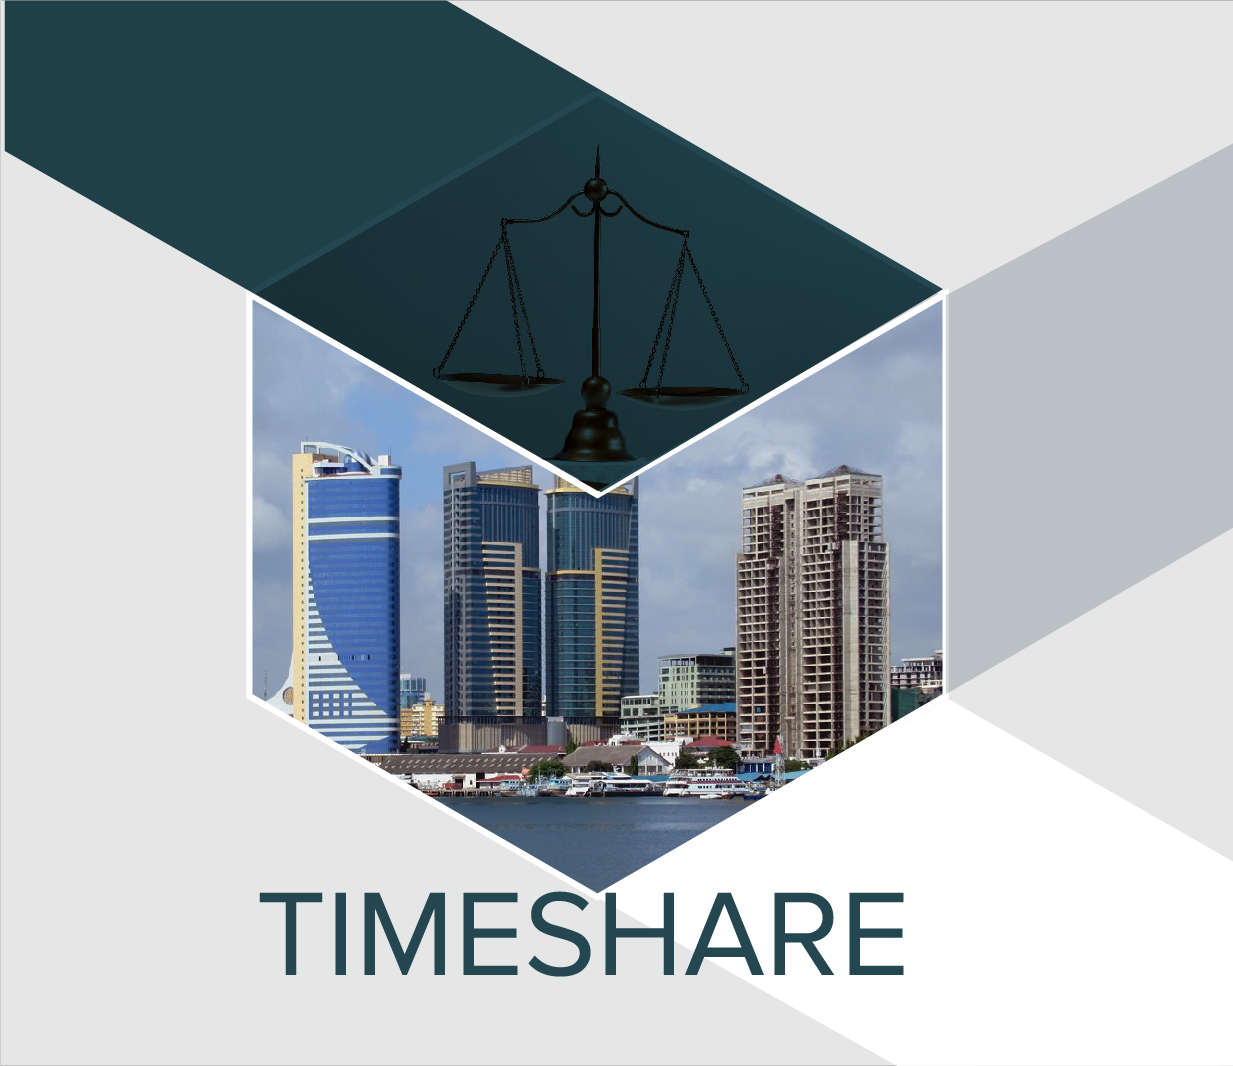 Discourse on why it is time for Tanzania to Adopt the concept of timeshare as a form of land holding by foreigners and local in the country.